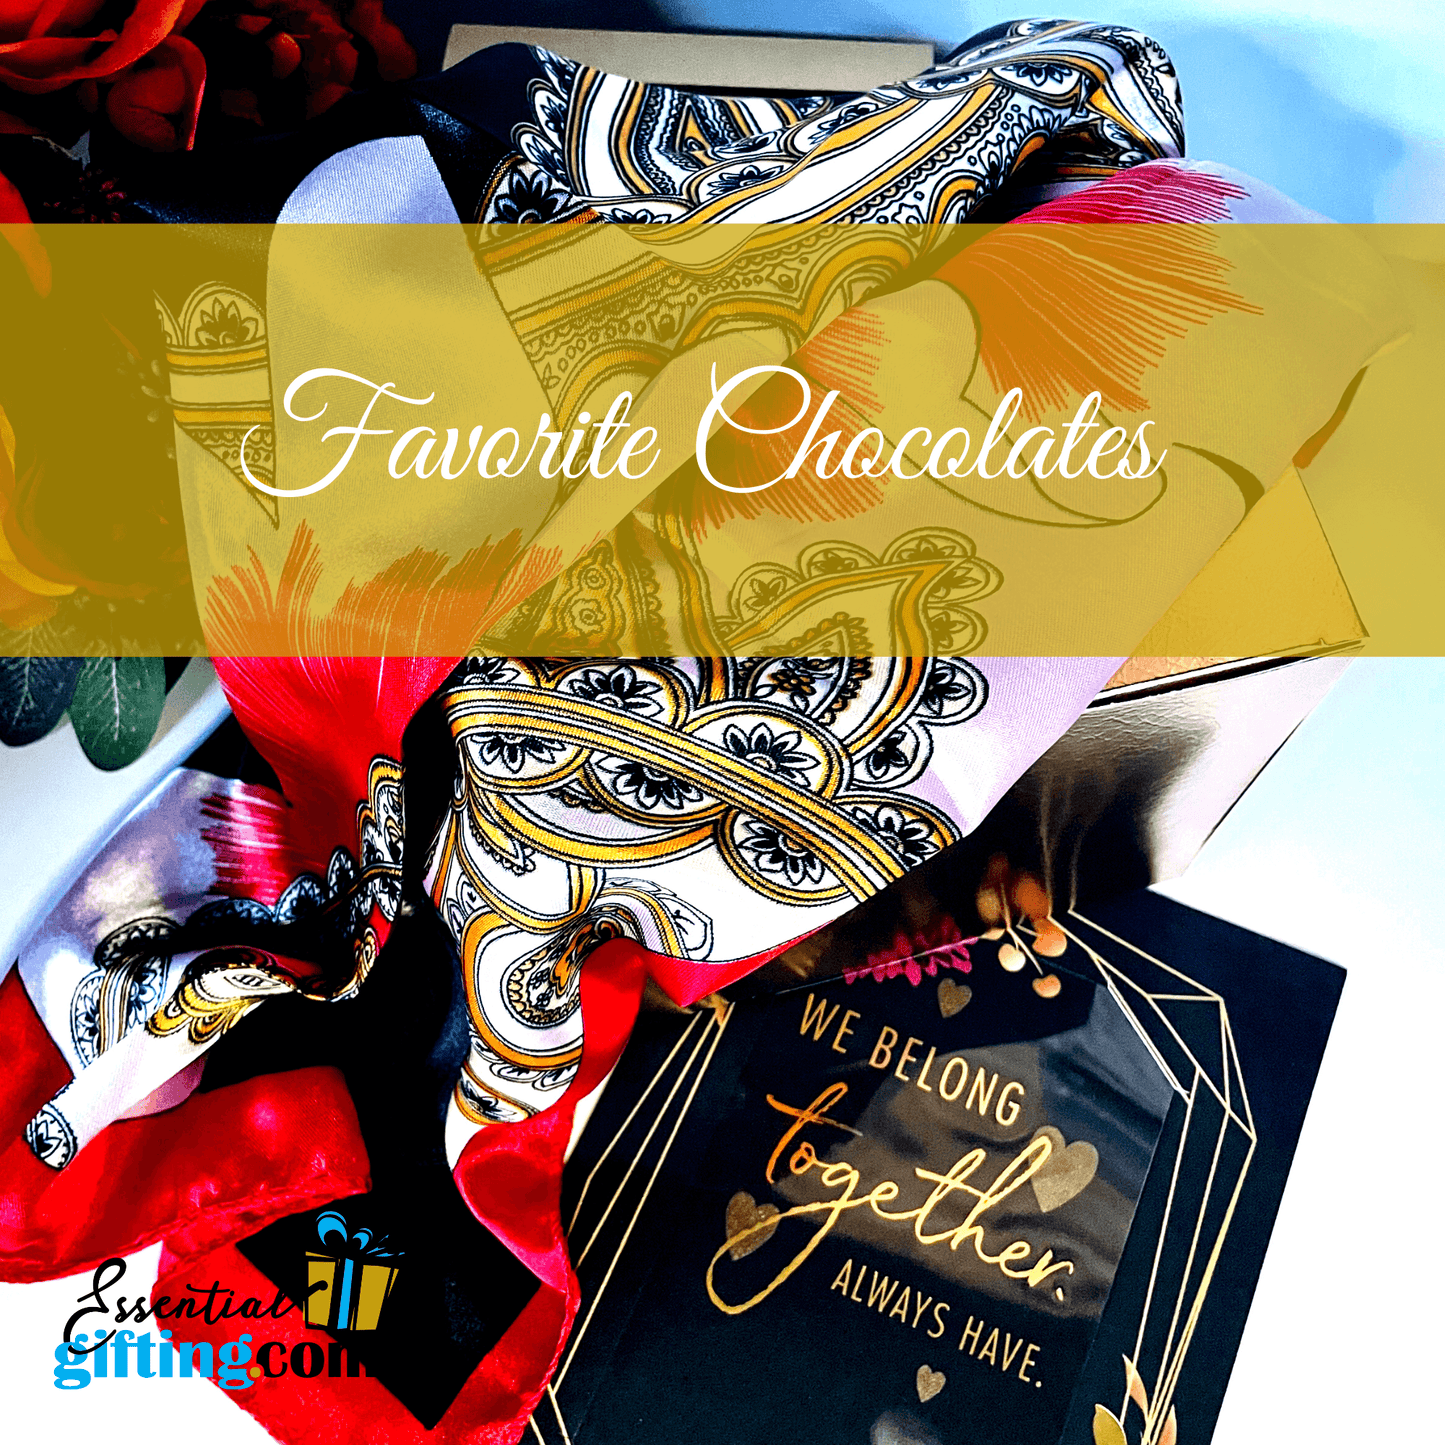 Delightful Chocolate Gift Box
Exquisite chocolate gift box adorned with vibrant floral accents and stylish patterns, offering a delectable treat for chocolate lovers.